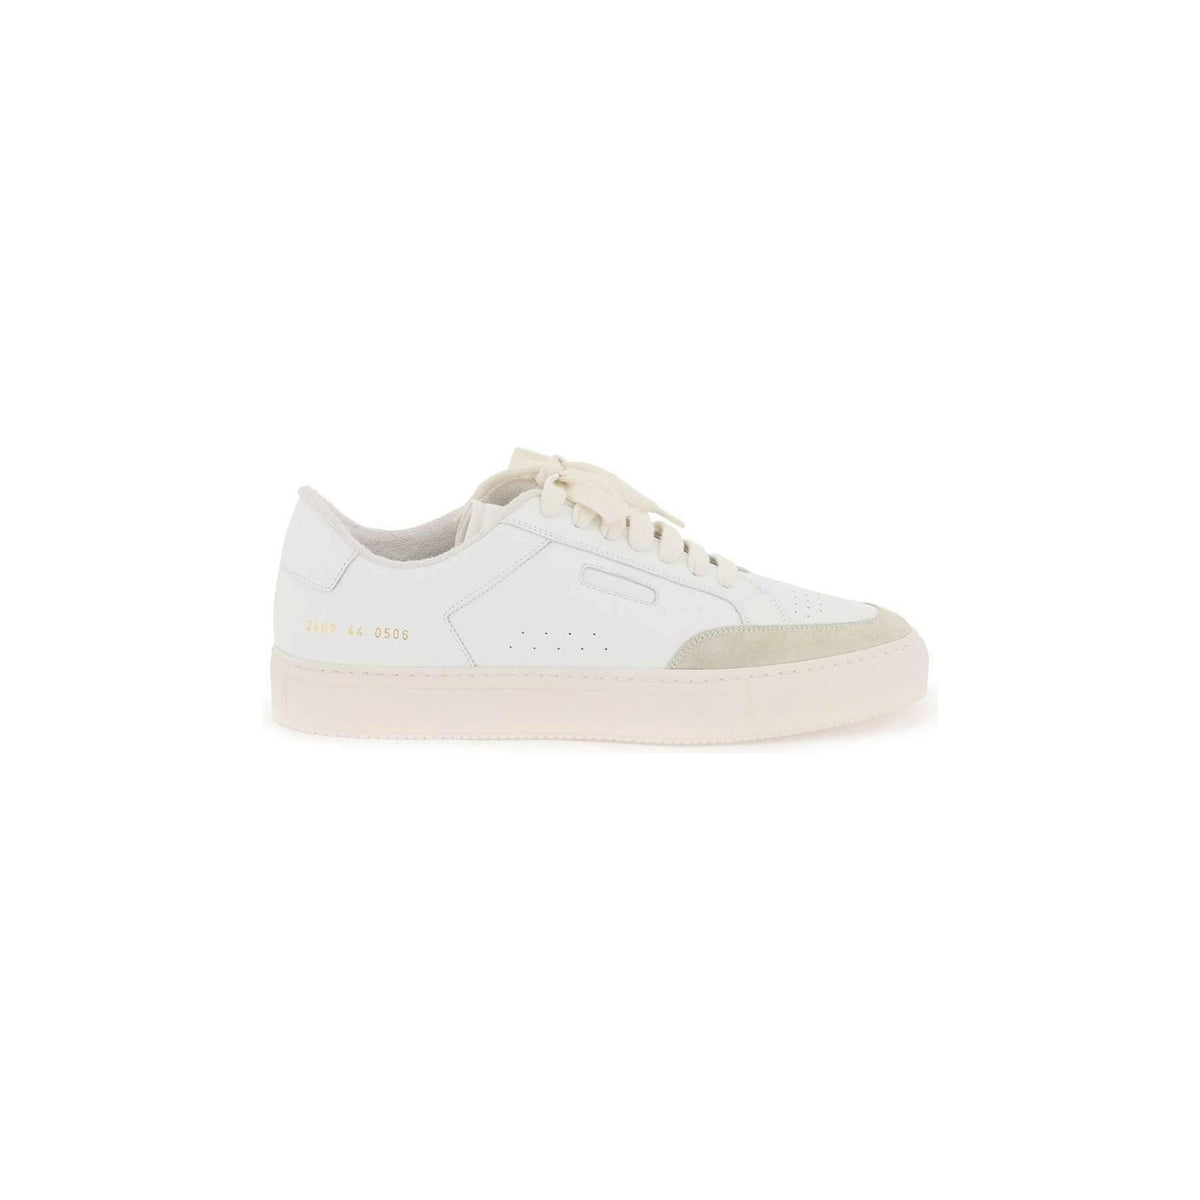 COMMON PROJECTS - White Tennis Pro Leather and Suede Sneakers - JOHN JULIA